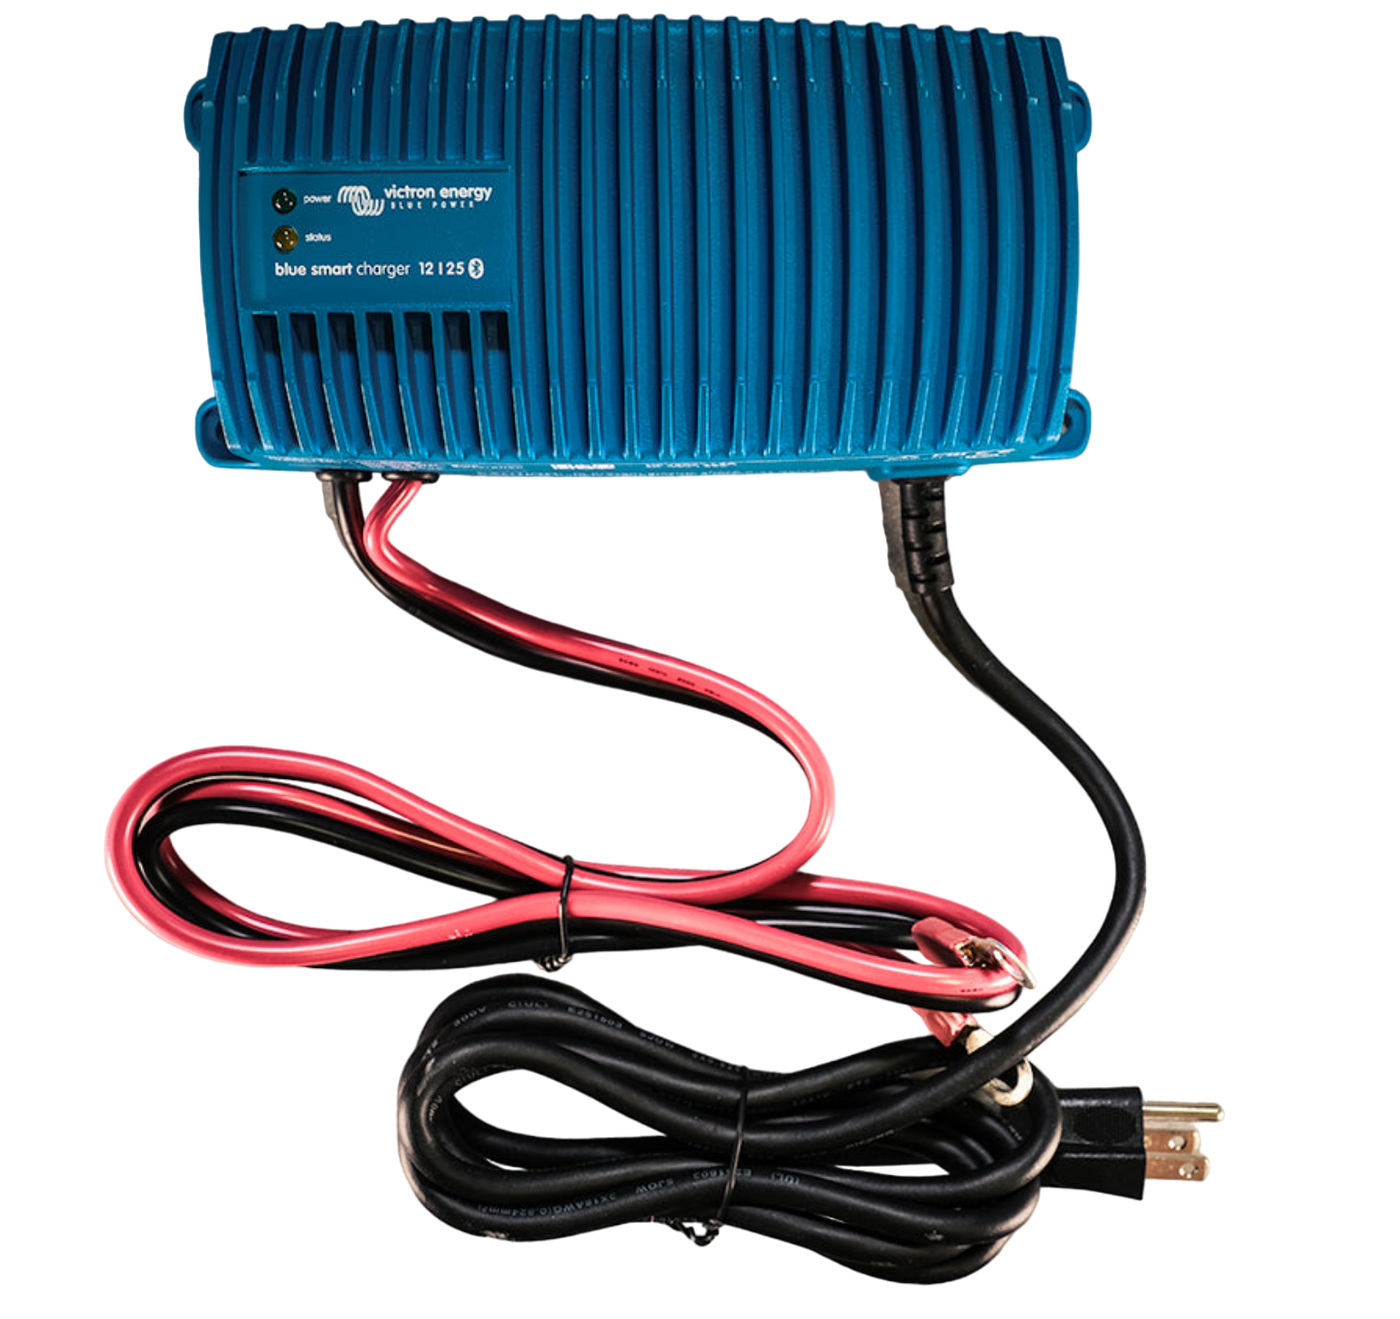 Blue Smart IP67 Charger 12v 25 amp by Victron Energy